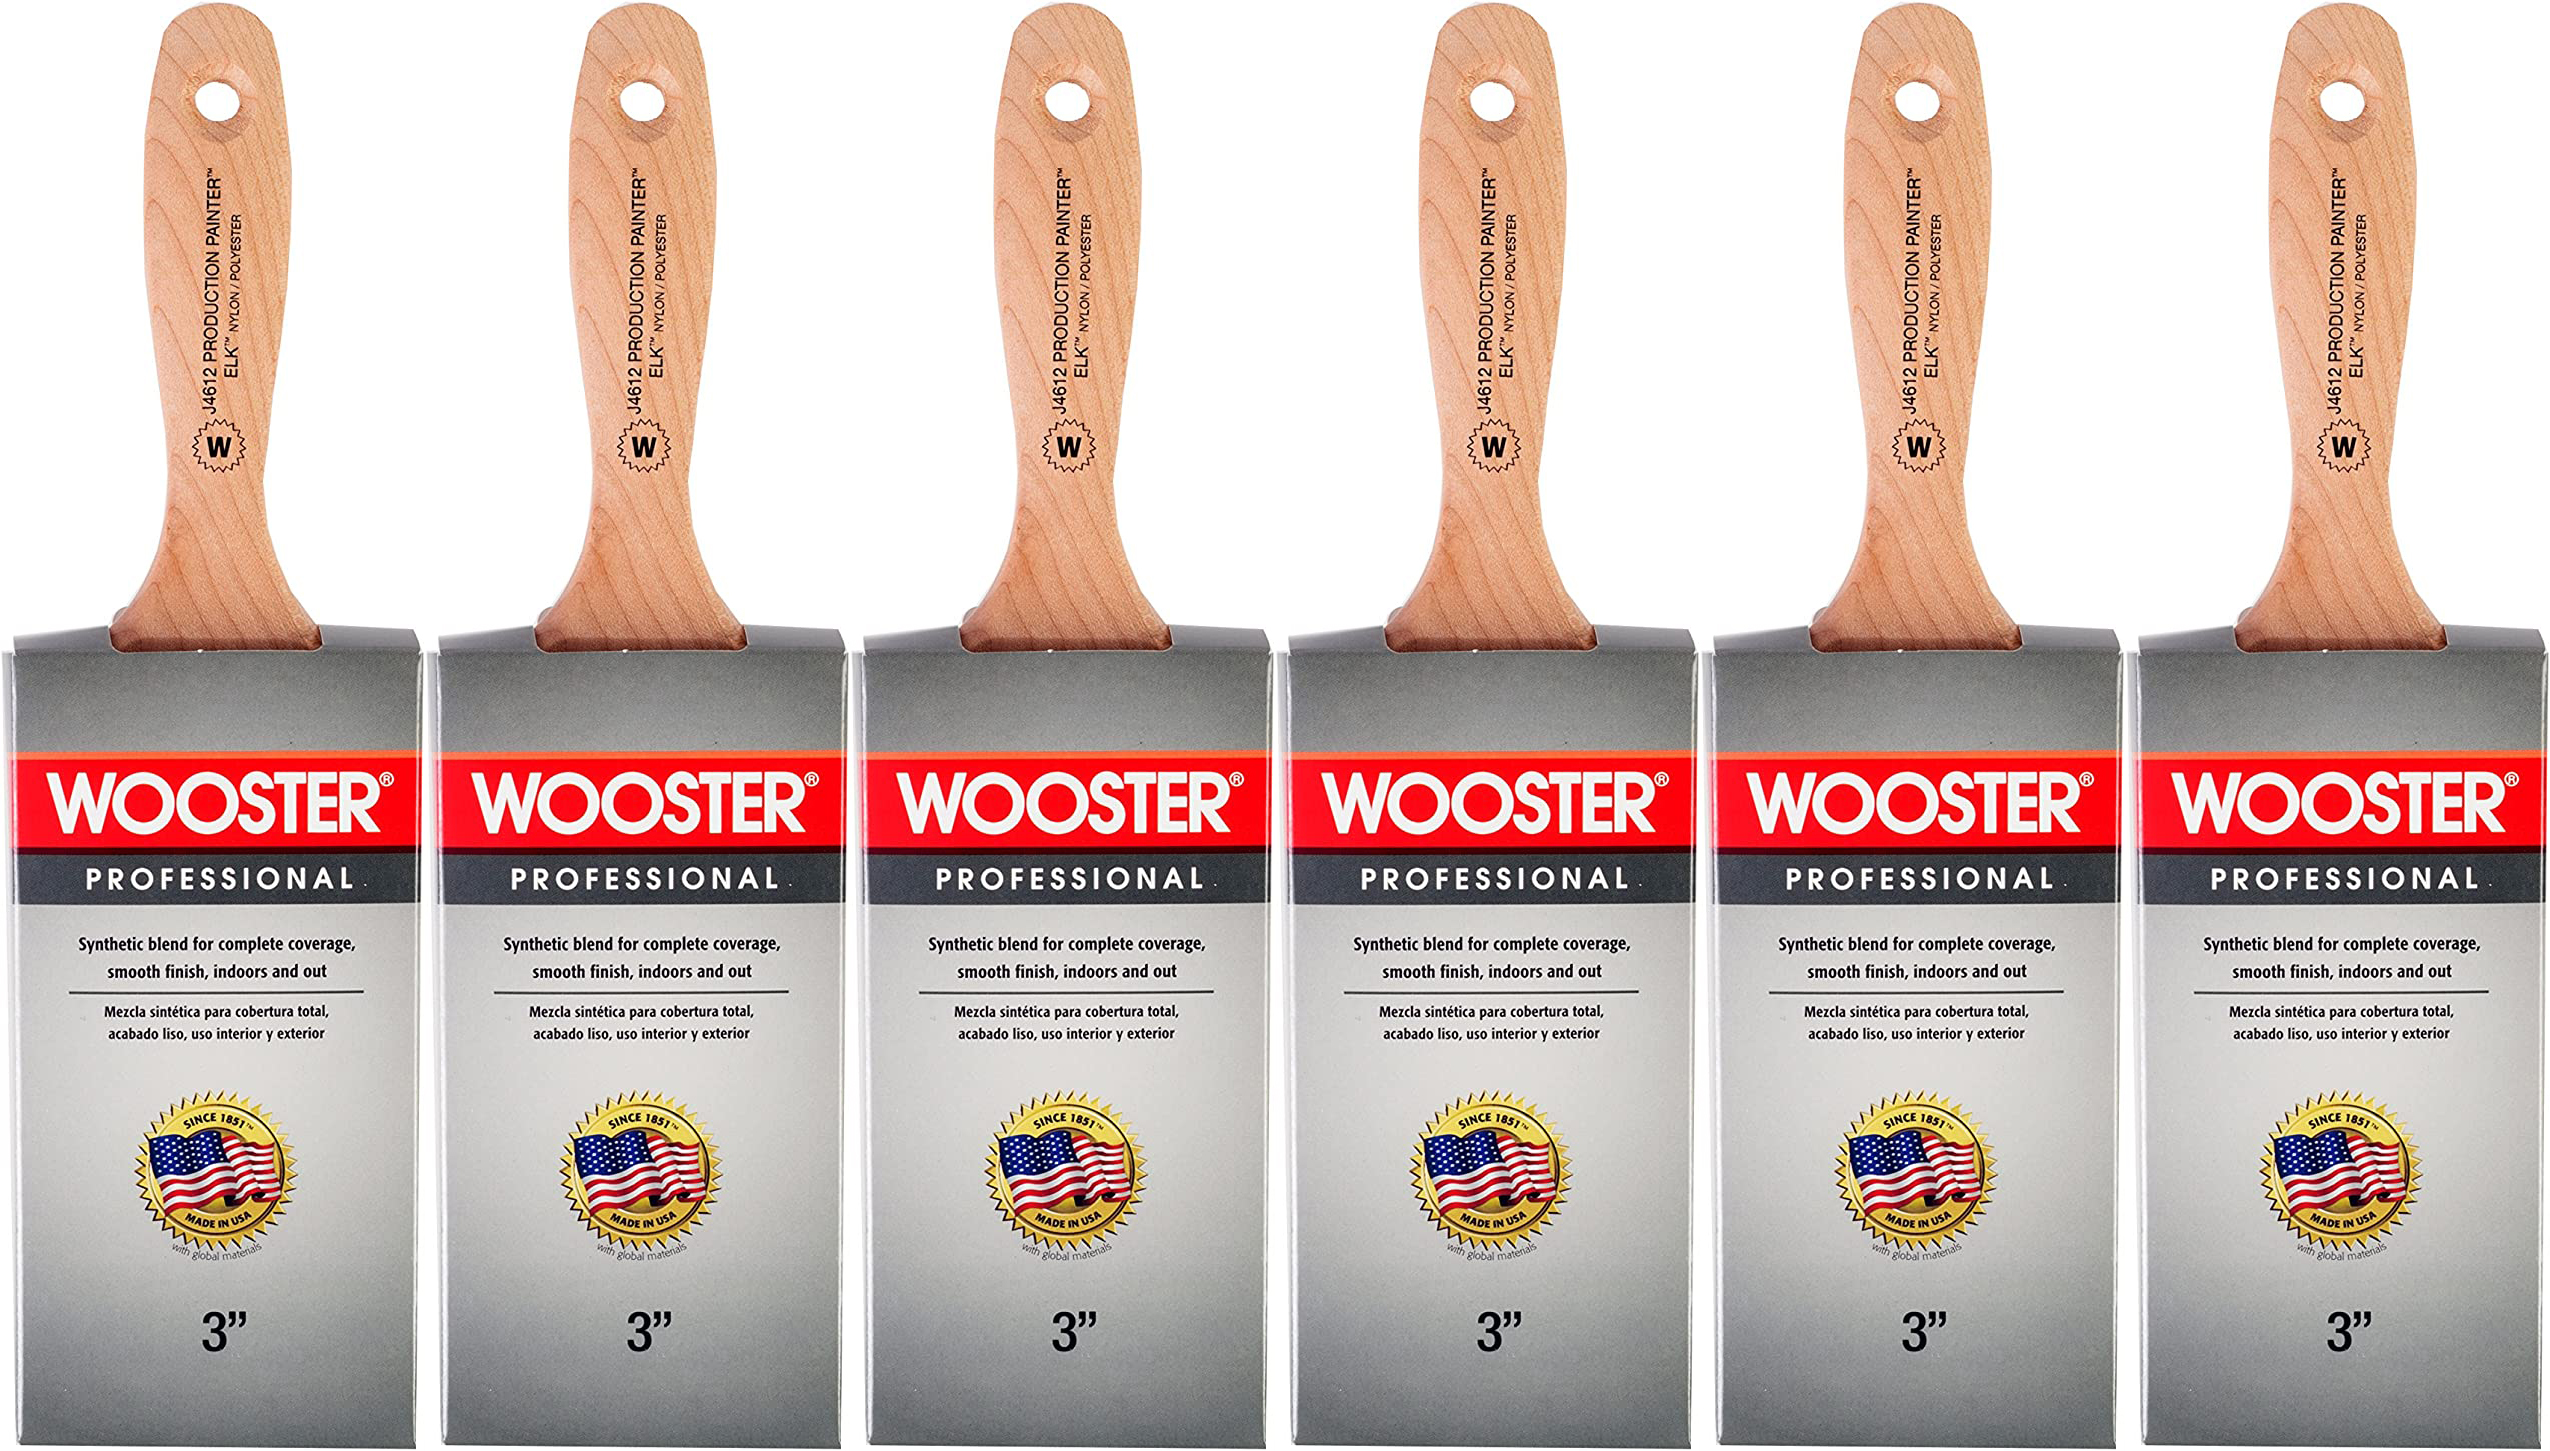 Wooster Genuine 3" Production Painter Extra-Thick Flat Paintbrush 6-Pack # J4612-3-6PK